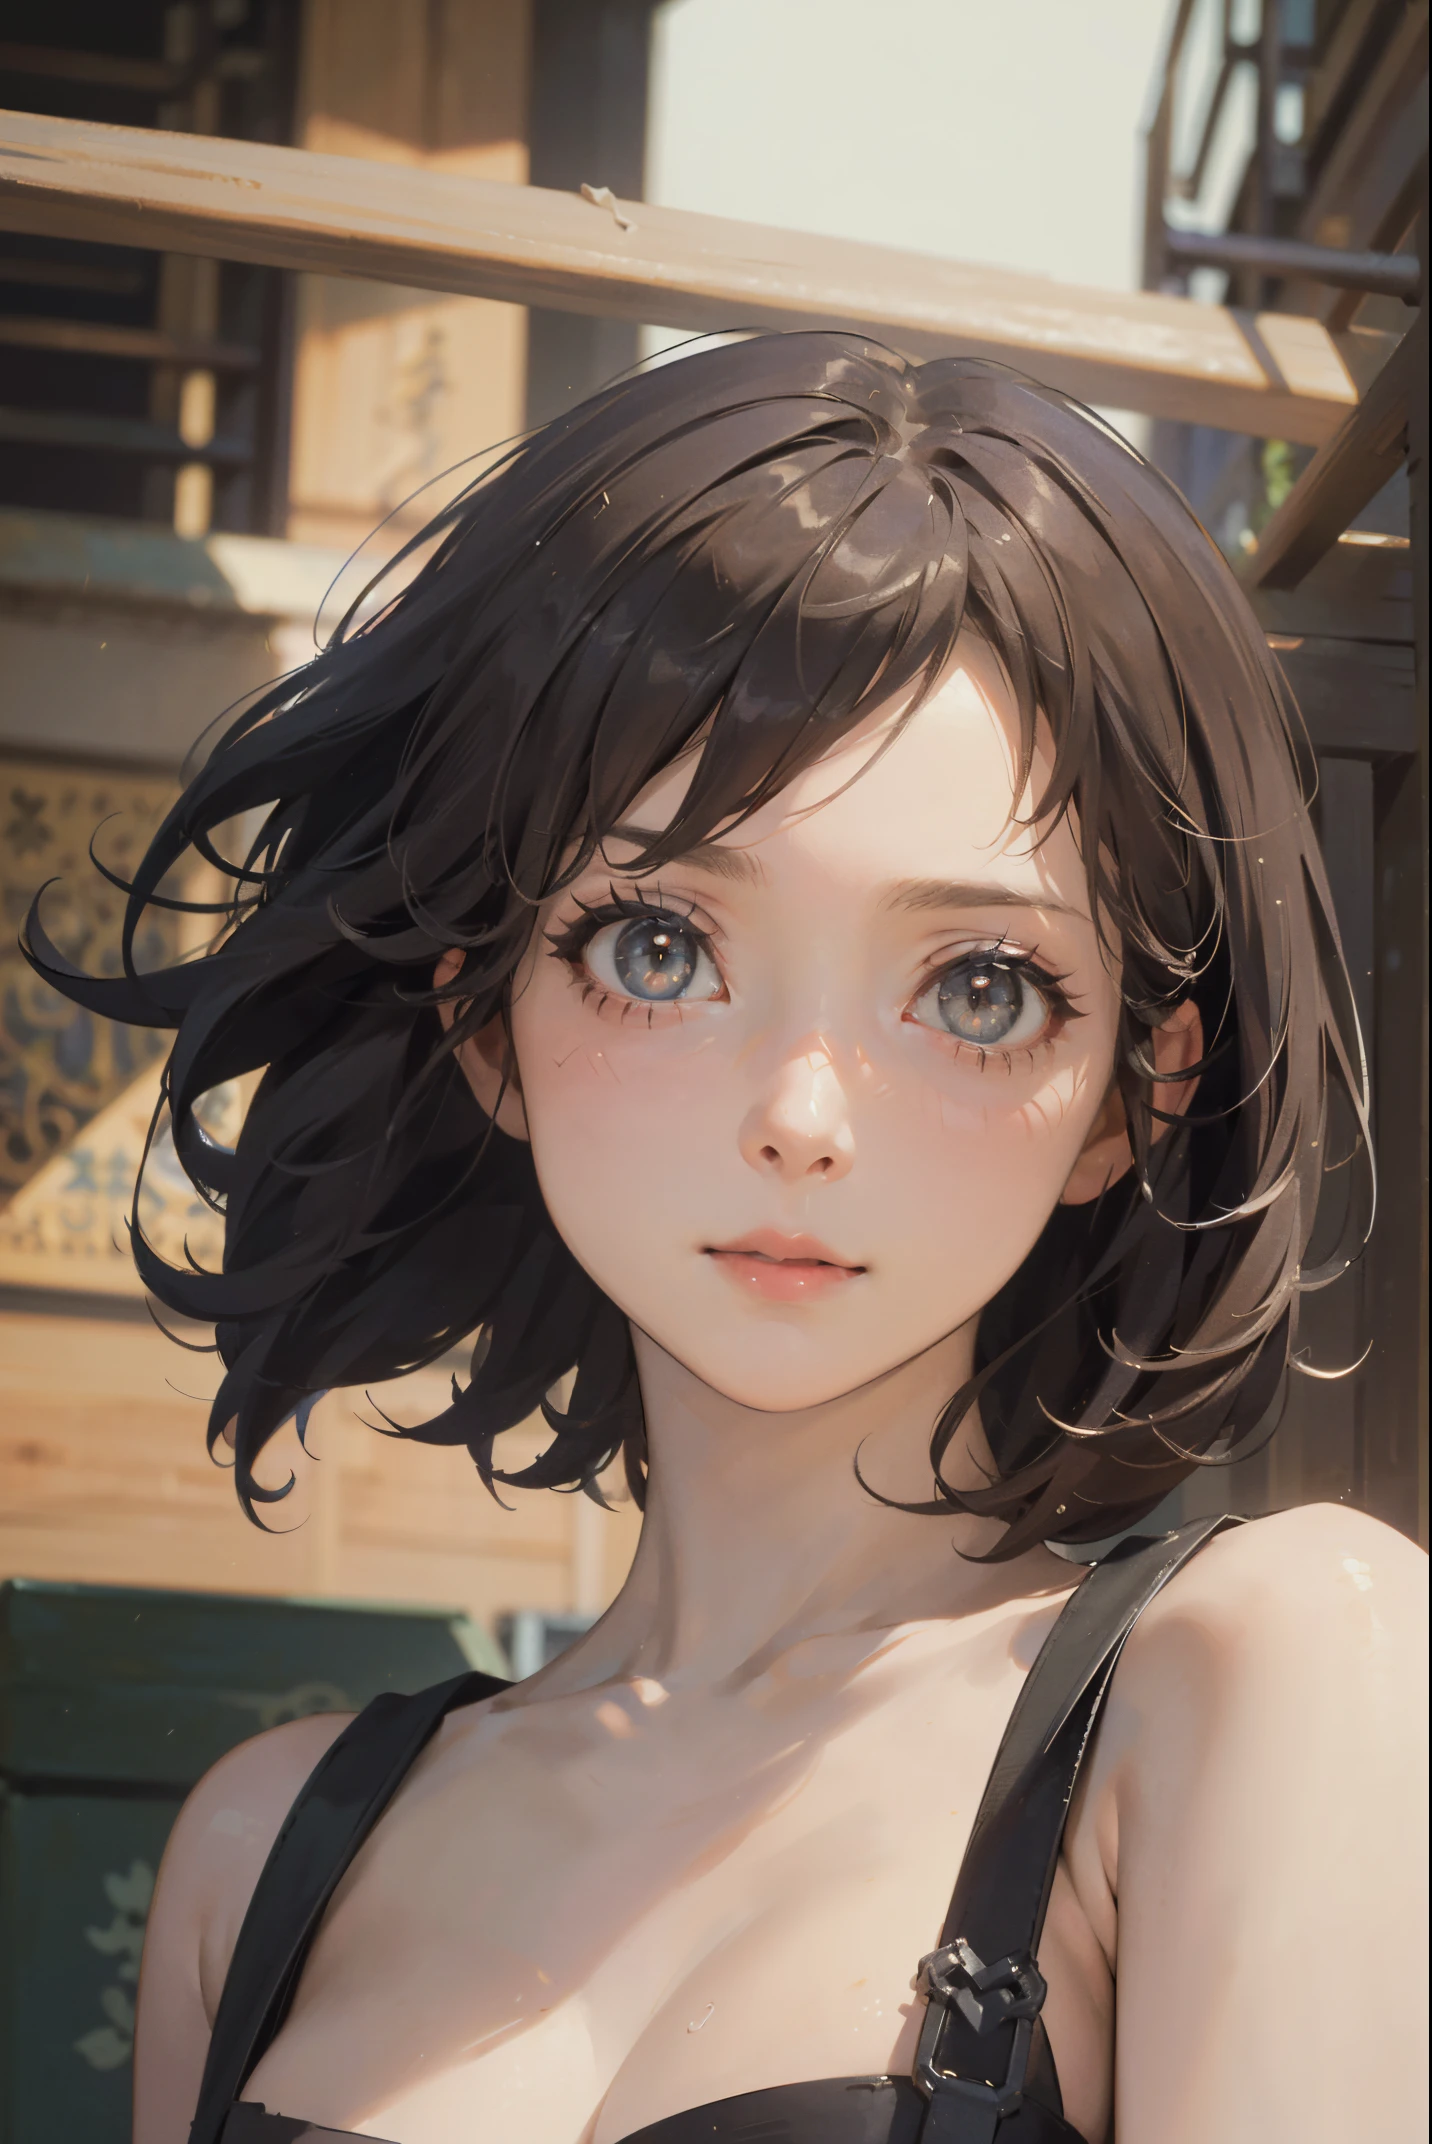 (1girl in, (((shorth hair))), art nouveau,(​masterpiece, top-quality, Near and far law, depth of fields:1.5), Beautiful expression, 8k, Raw foto, nffsw, Photorealsitic, film grains, chromatic abberation, hight resolution, Ultra-detail, finely detail, Dynamic Lighting, Dramatic Lighting、shadowy、extremely detailed eye and face、Round pupils、realistic eyes body bien、clean back ground